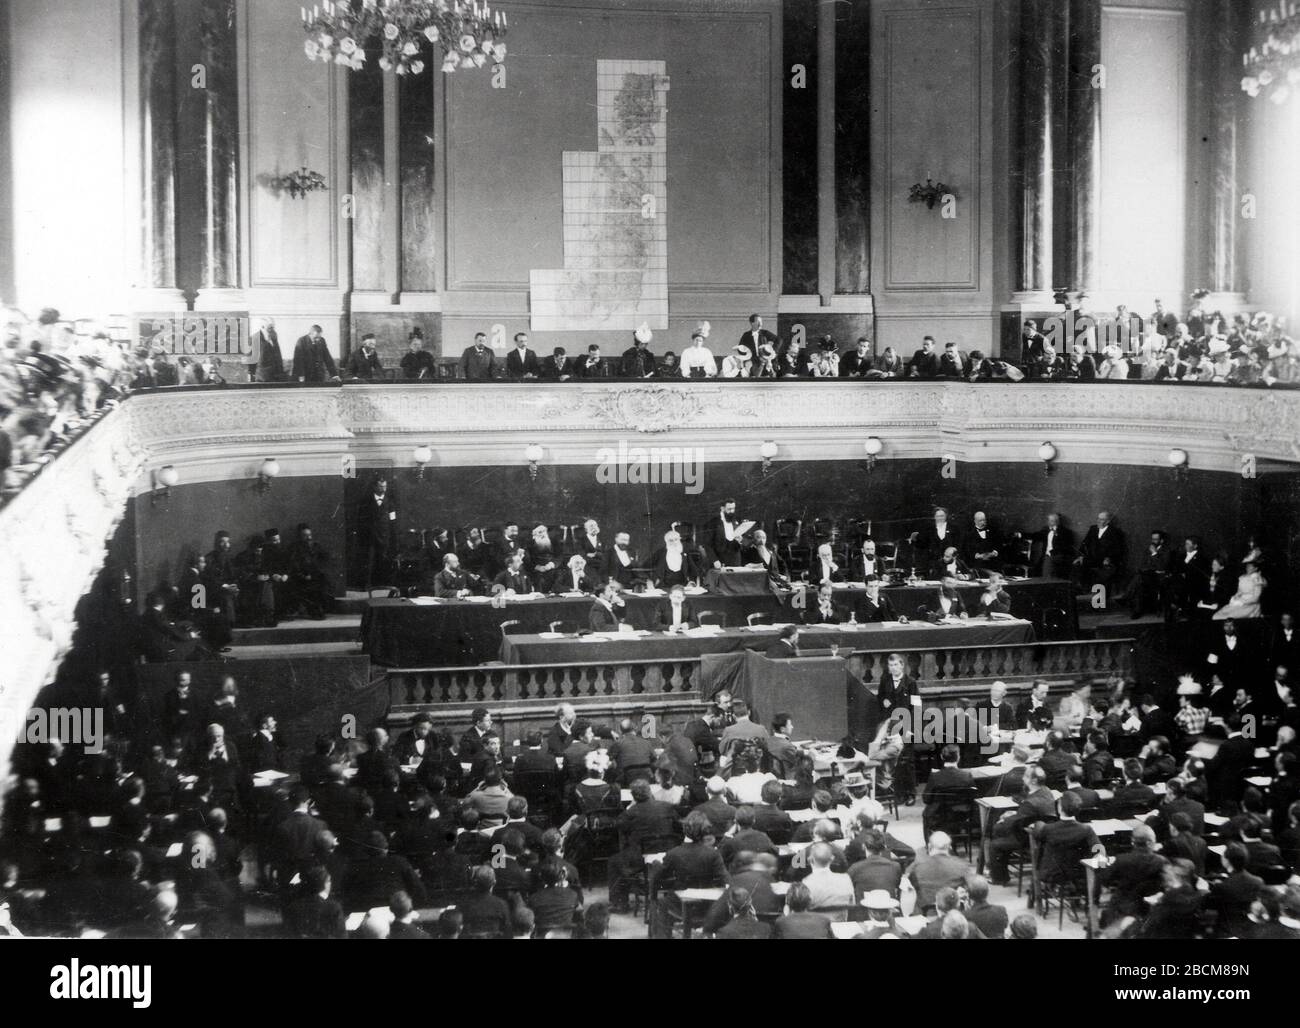 English Theodor Herzl Addressing The First Or Second Zionist Congress In Basel Switzerland In 17 8 E I I I I U I E U E Ss I I I O I O I E C I U E I I C O E E N U